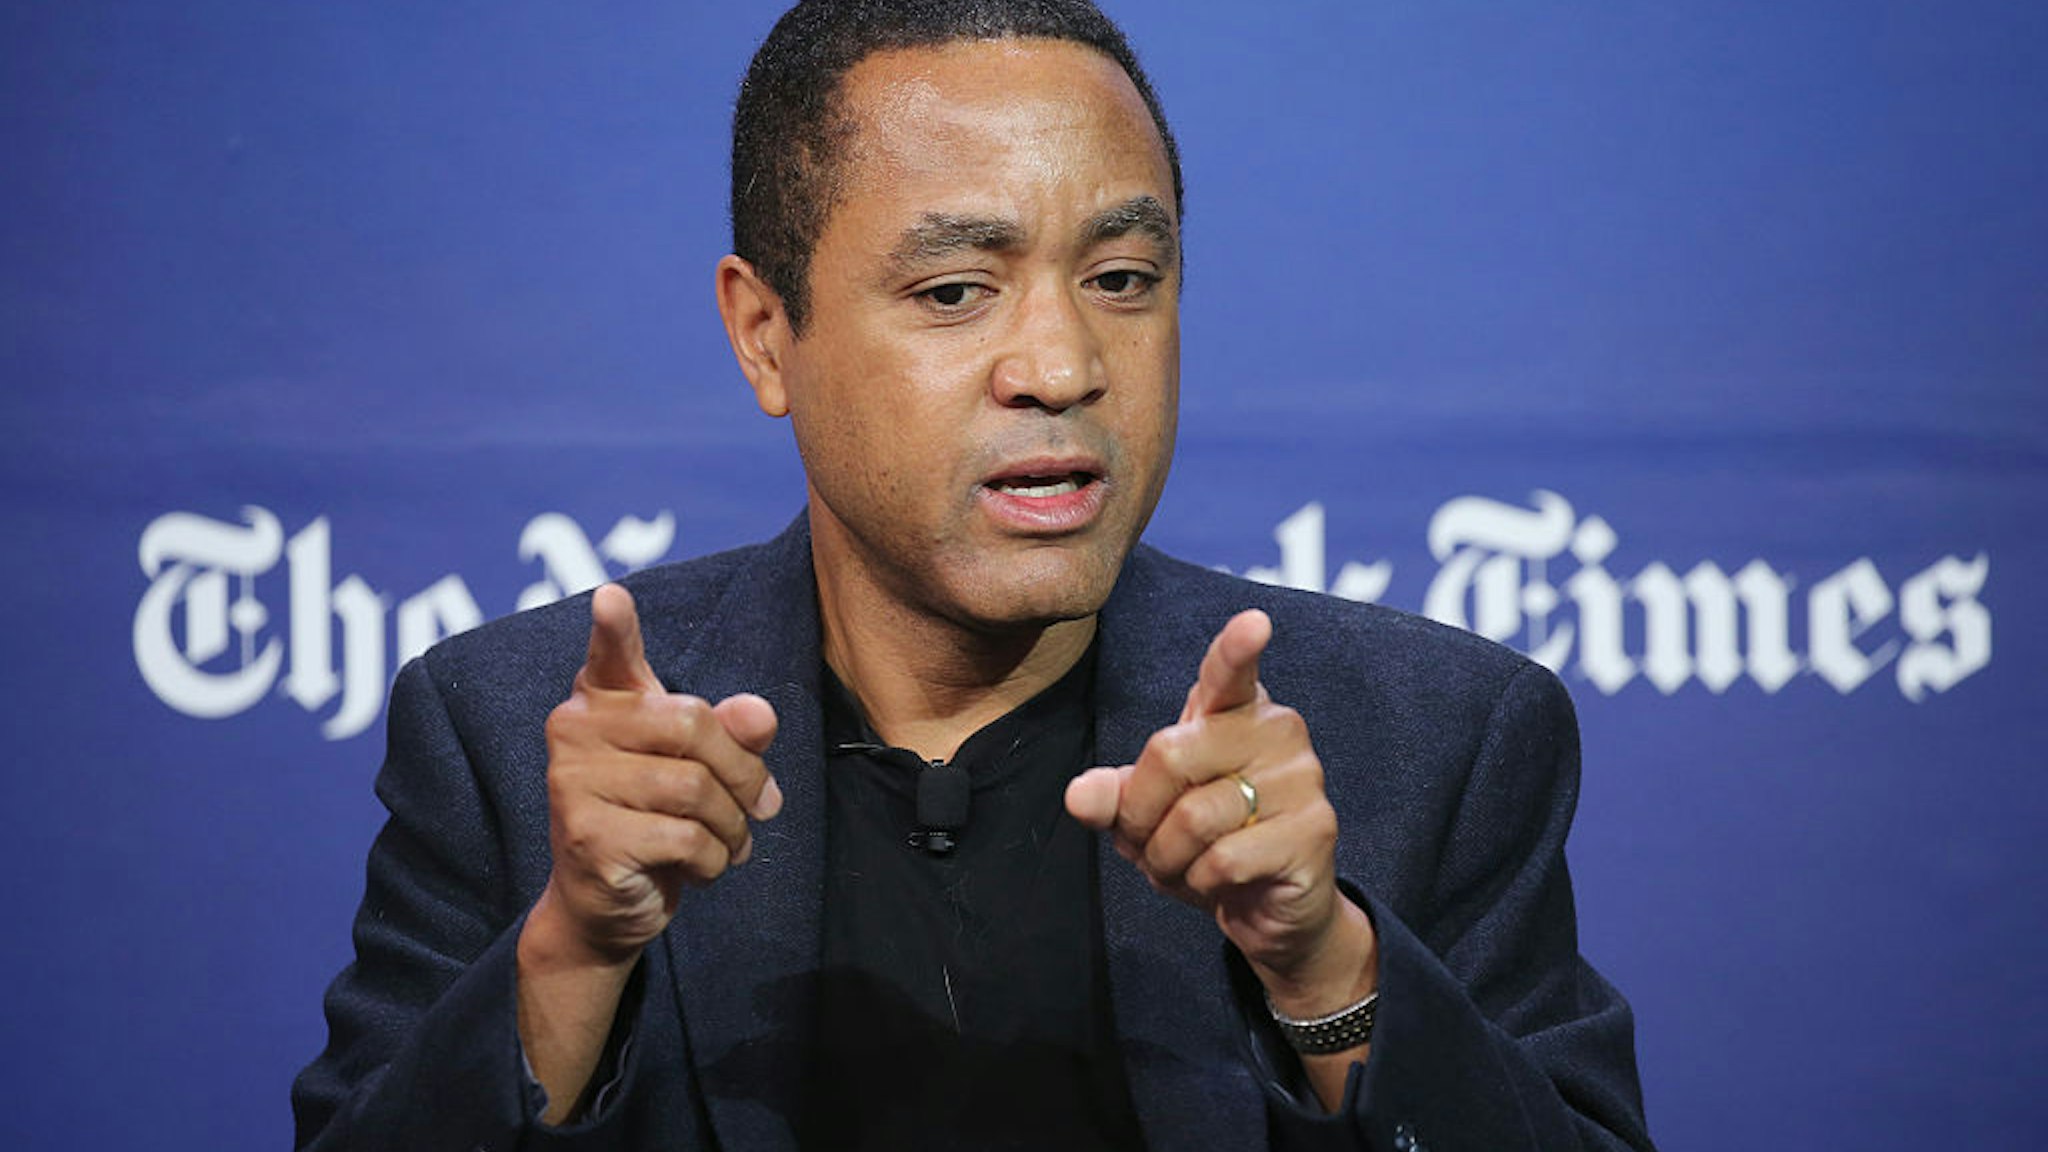 NEW YORK, NY - SEPTEMBER 17: Author, columnist and professor at Columbia University, John McWhorter speaks onstage during the New York Times Schools for Tomorrow conference at New York Times Building on September 17, 2015 in New York City.